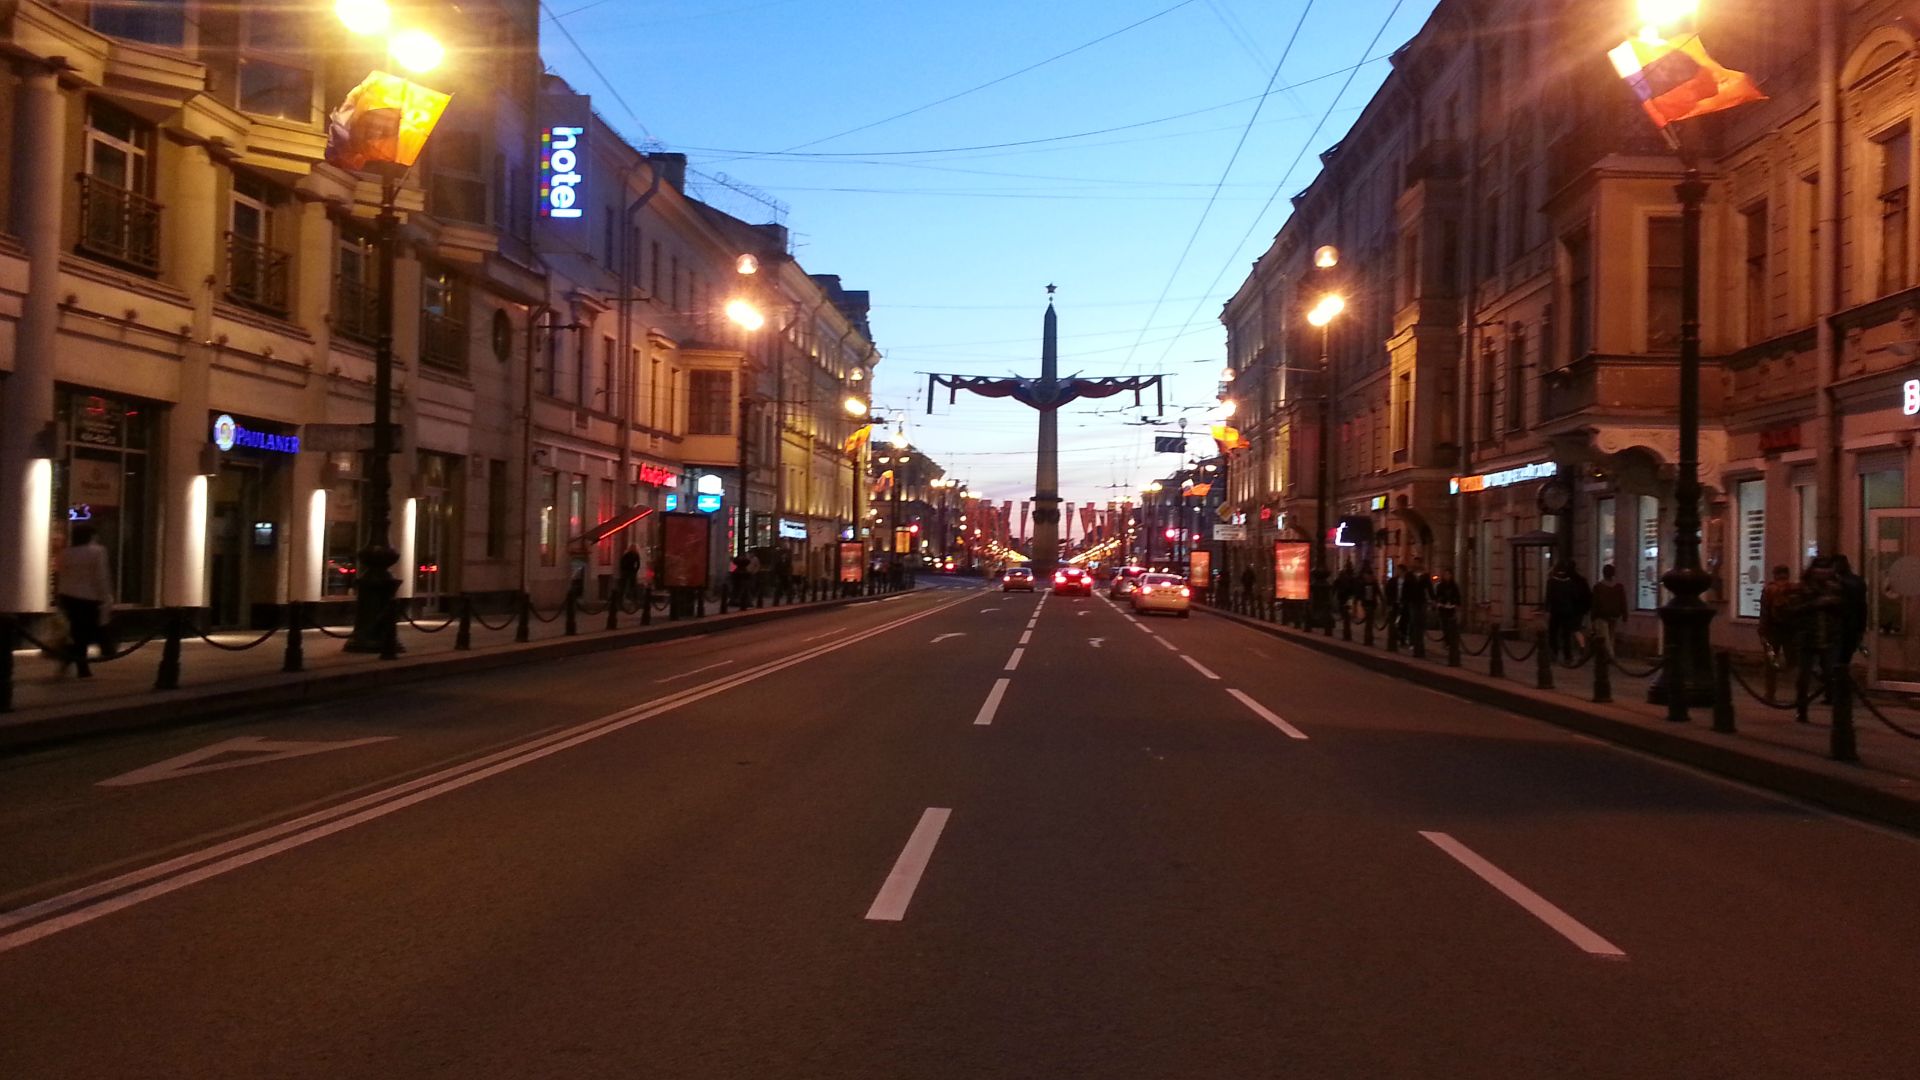 A typical St. Petersburg street